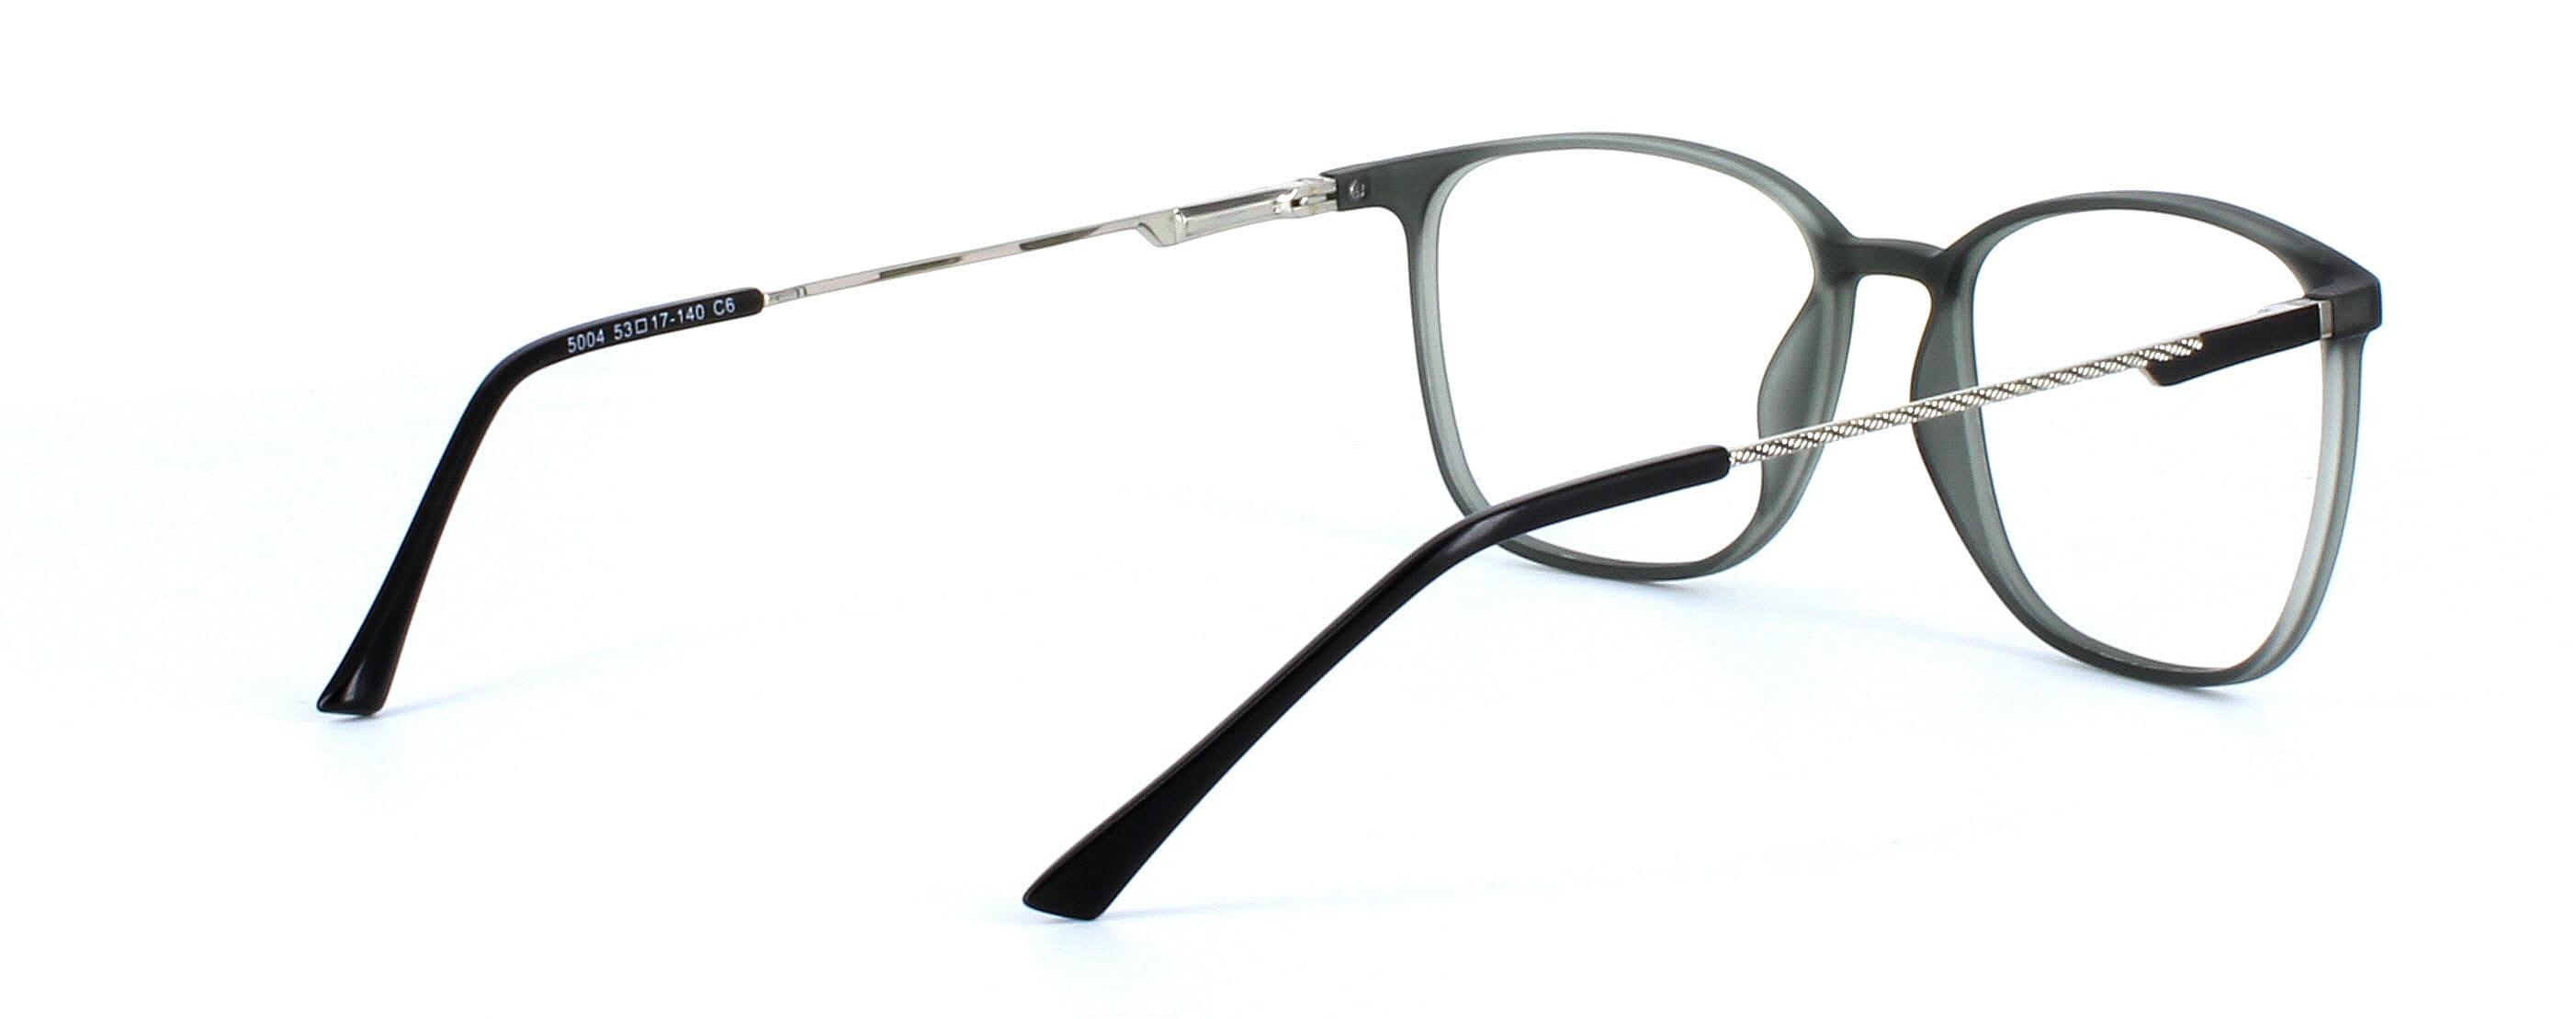 Ceres - square shaped plastic unisex glasses here in grey - image 4